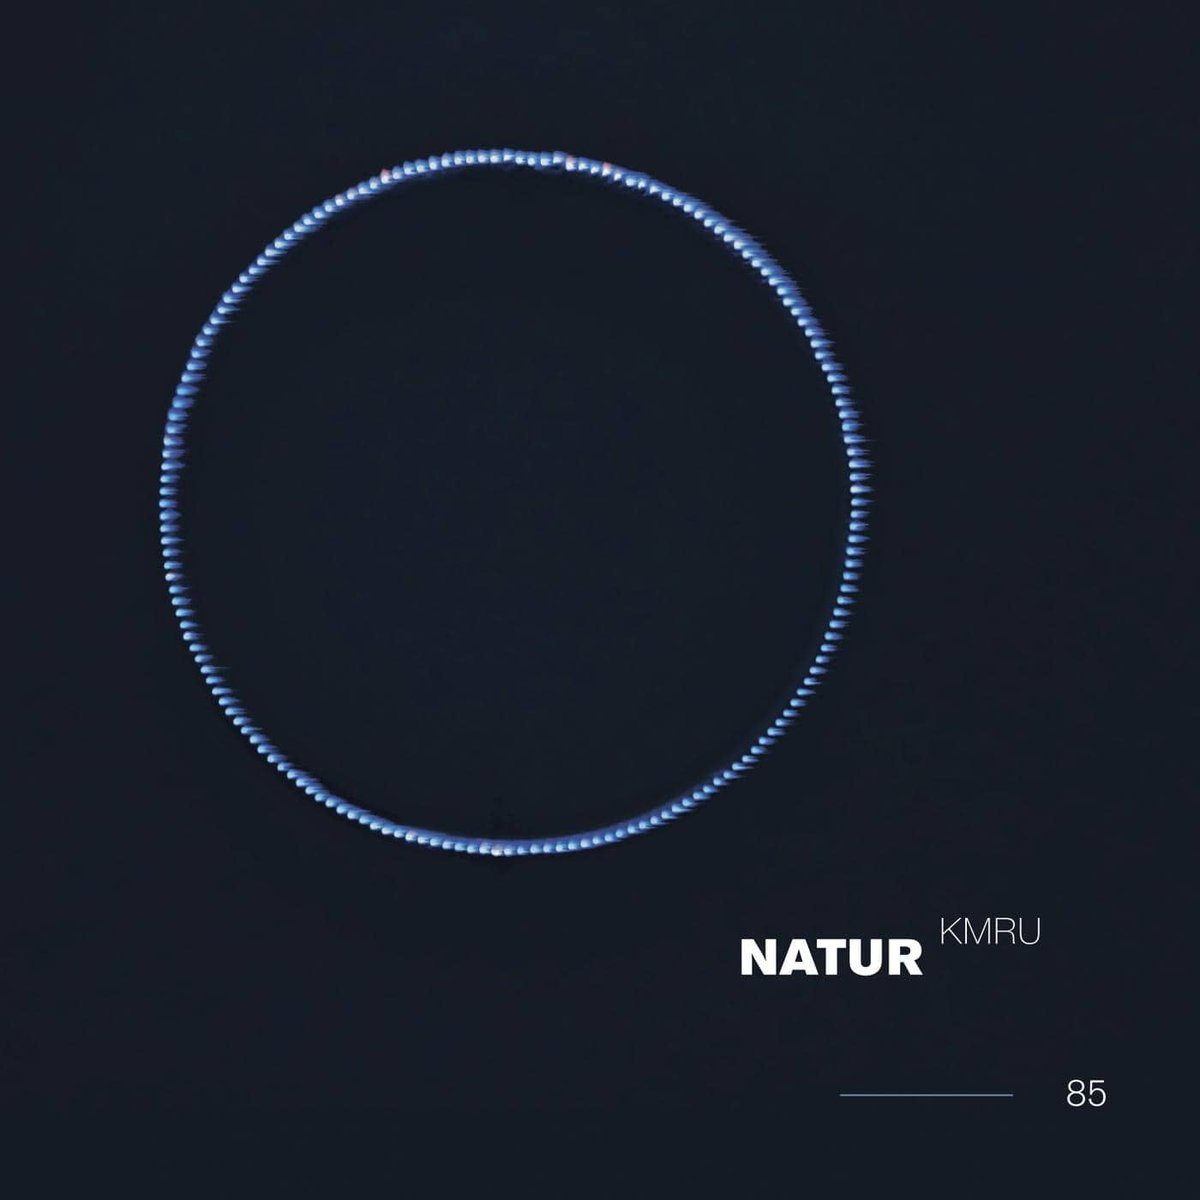 PRE-ORDER: 'Natur' by KMRU CD release on Touch from acclaimed ambient/experimental musician KMRU, who here uses manipulated and processed field recordings to extract often hidden and overlooked sounds. @joseph_kamaru normanrecords.com/records/203147…